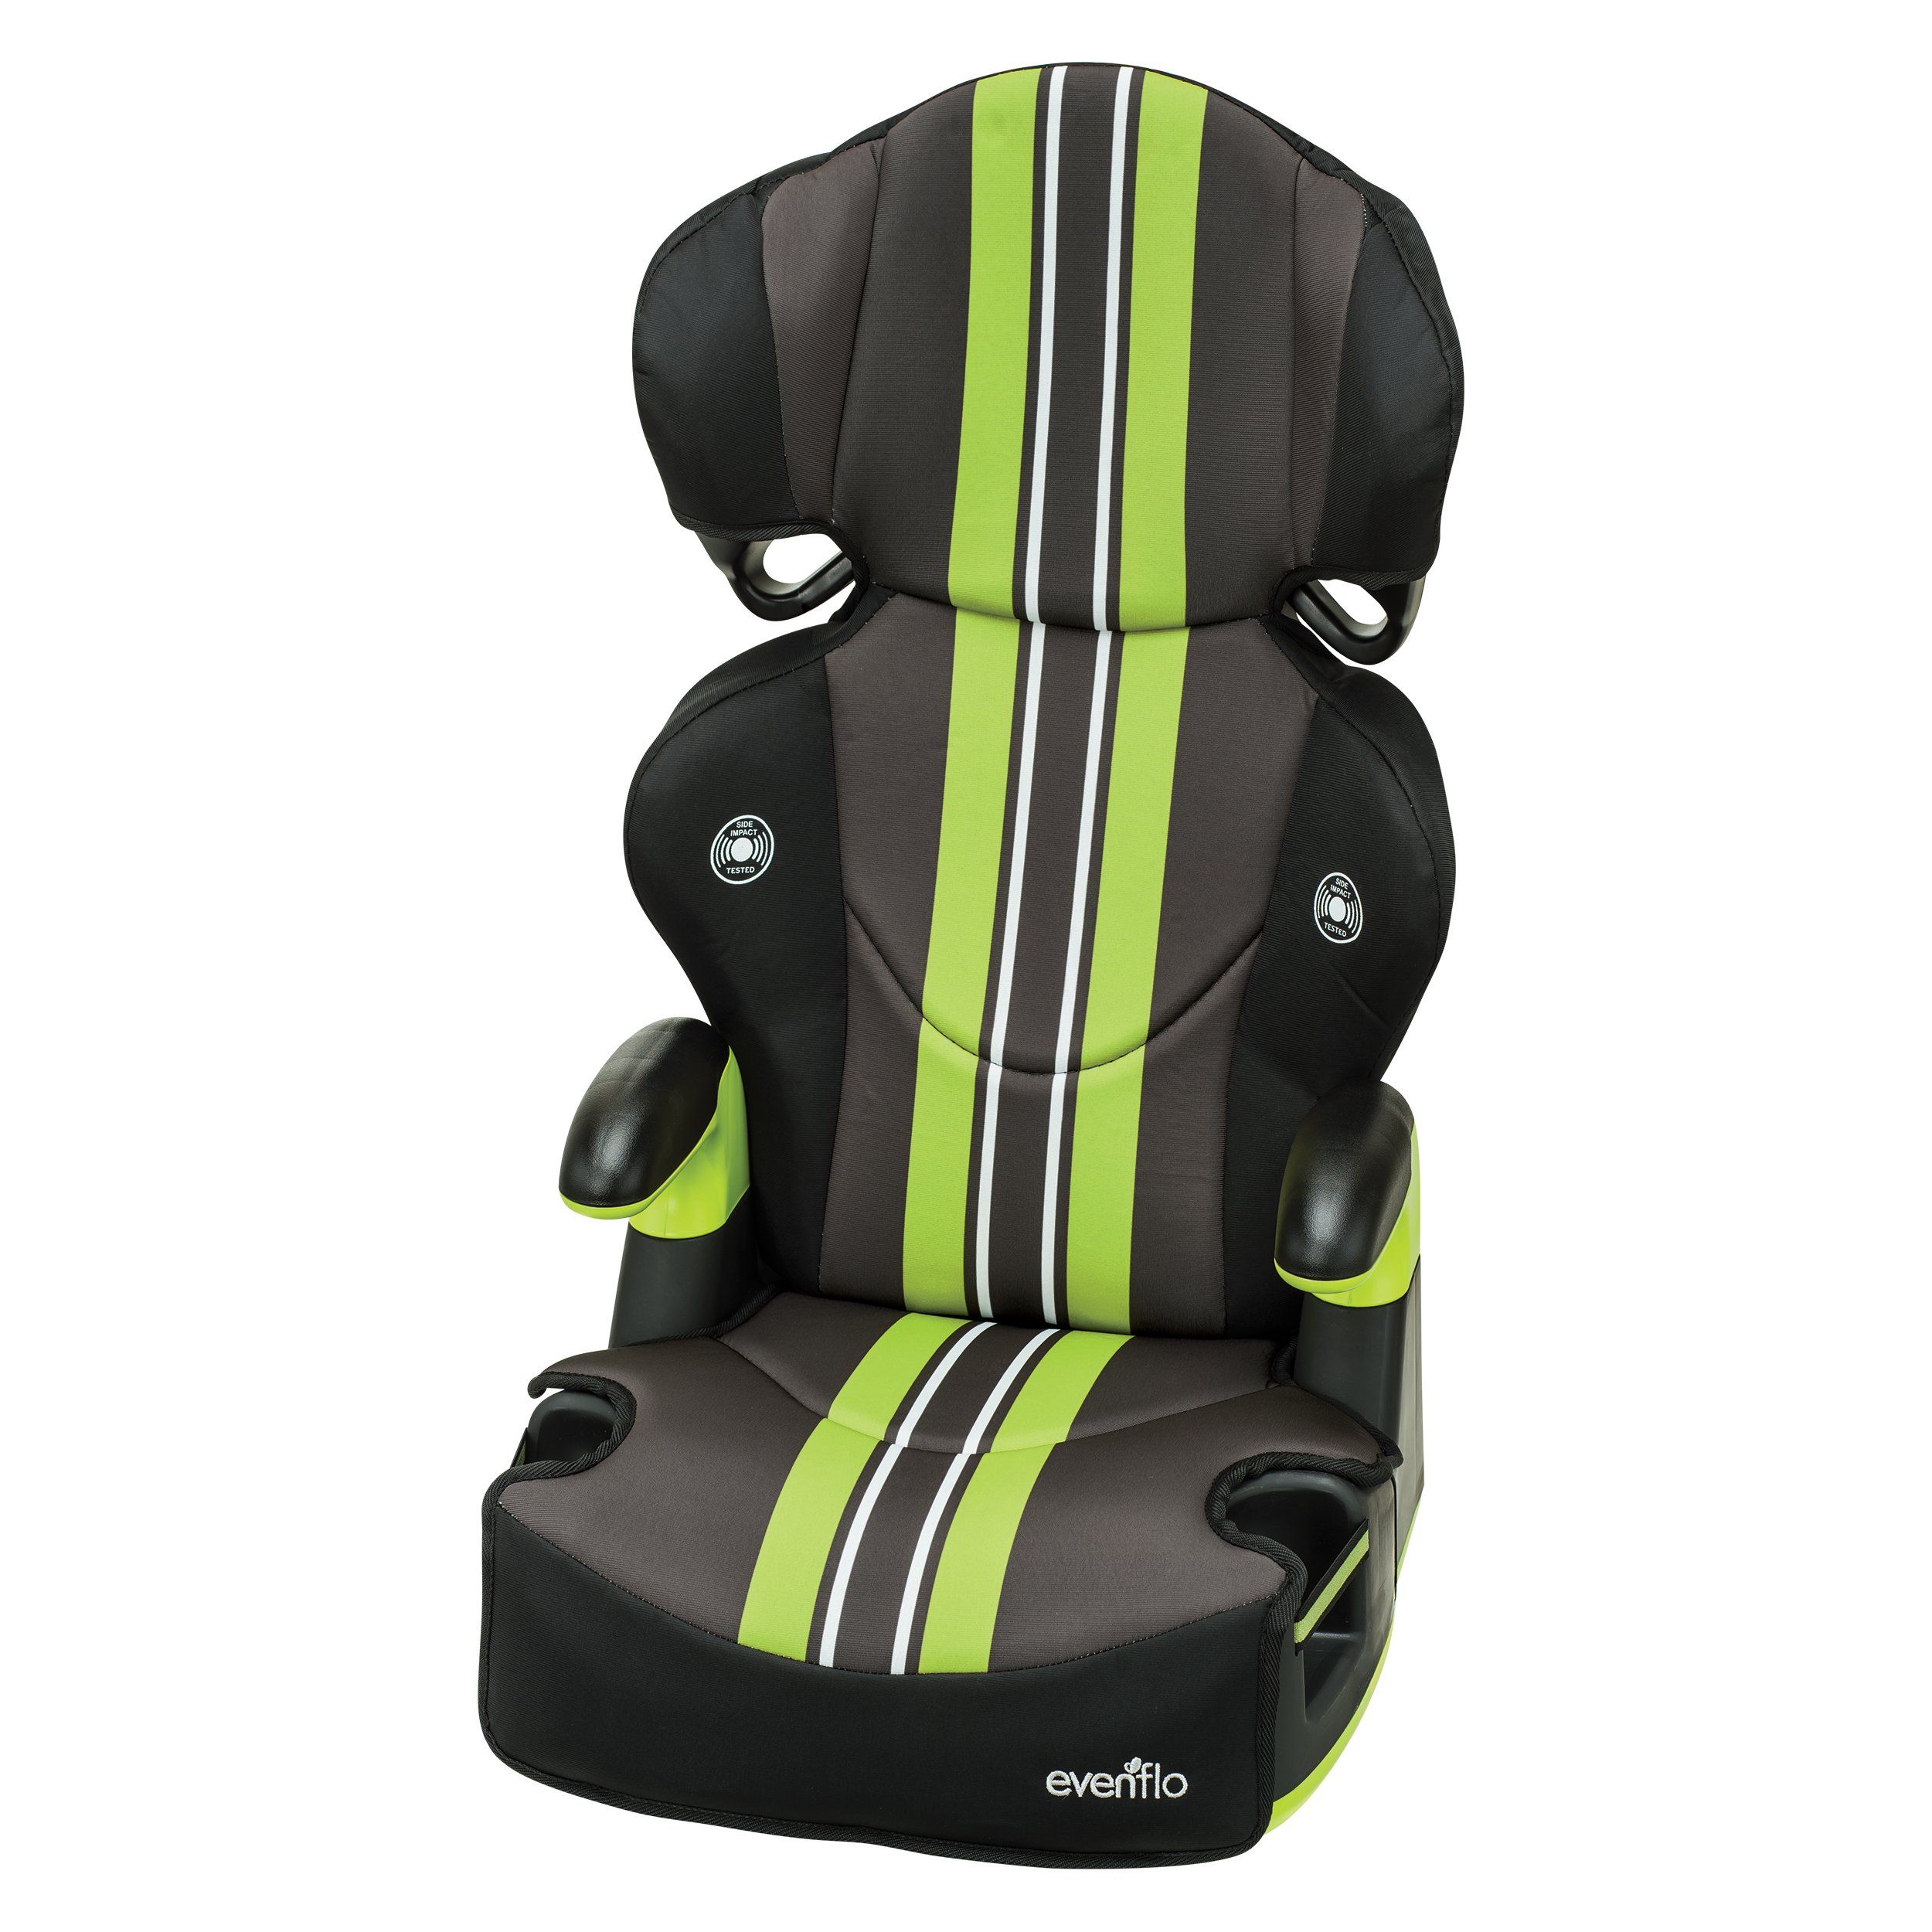 Evenflo Big Kid Sport High Back Booster Car Seat Grand Prix ** Want to